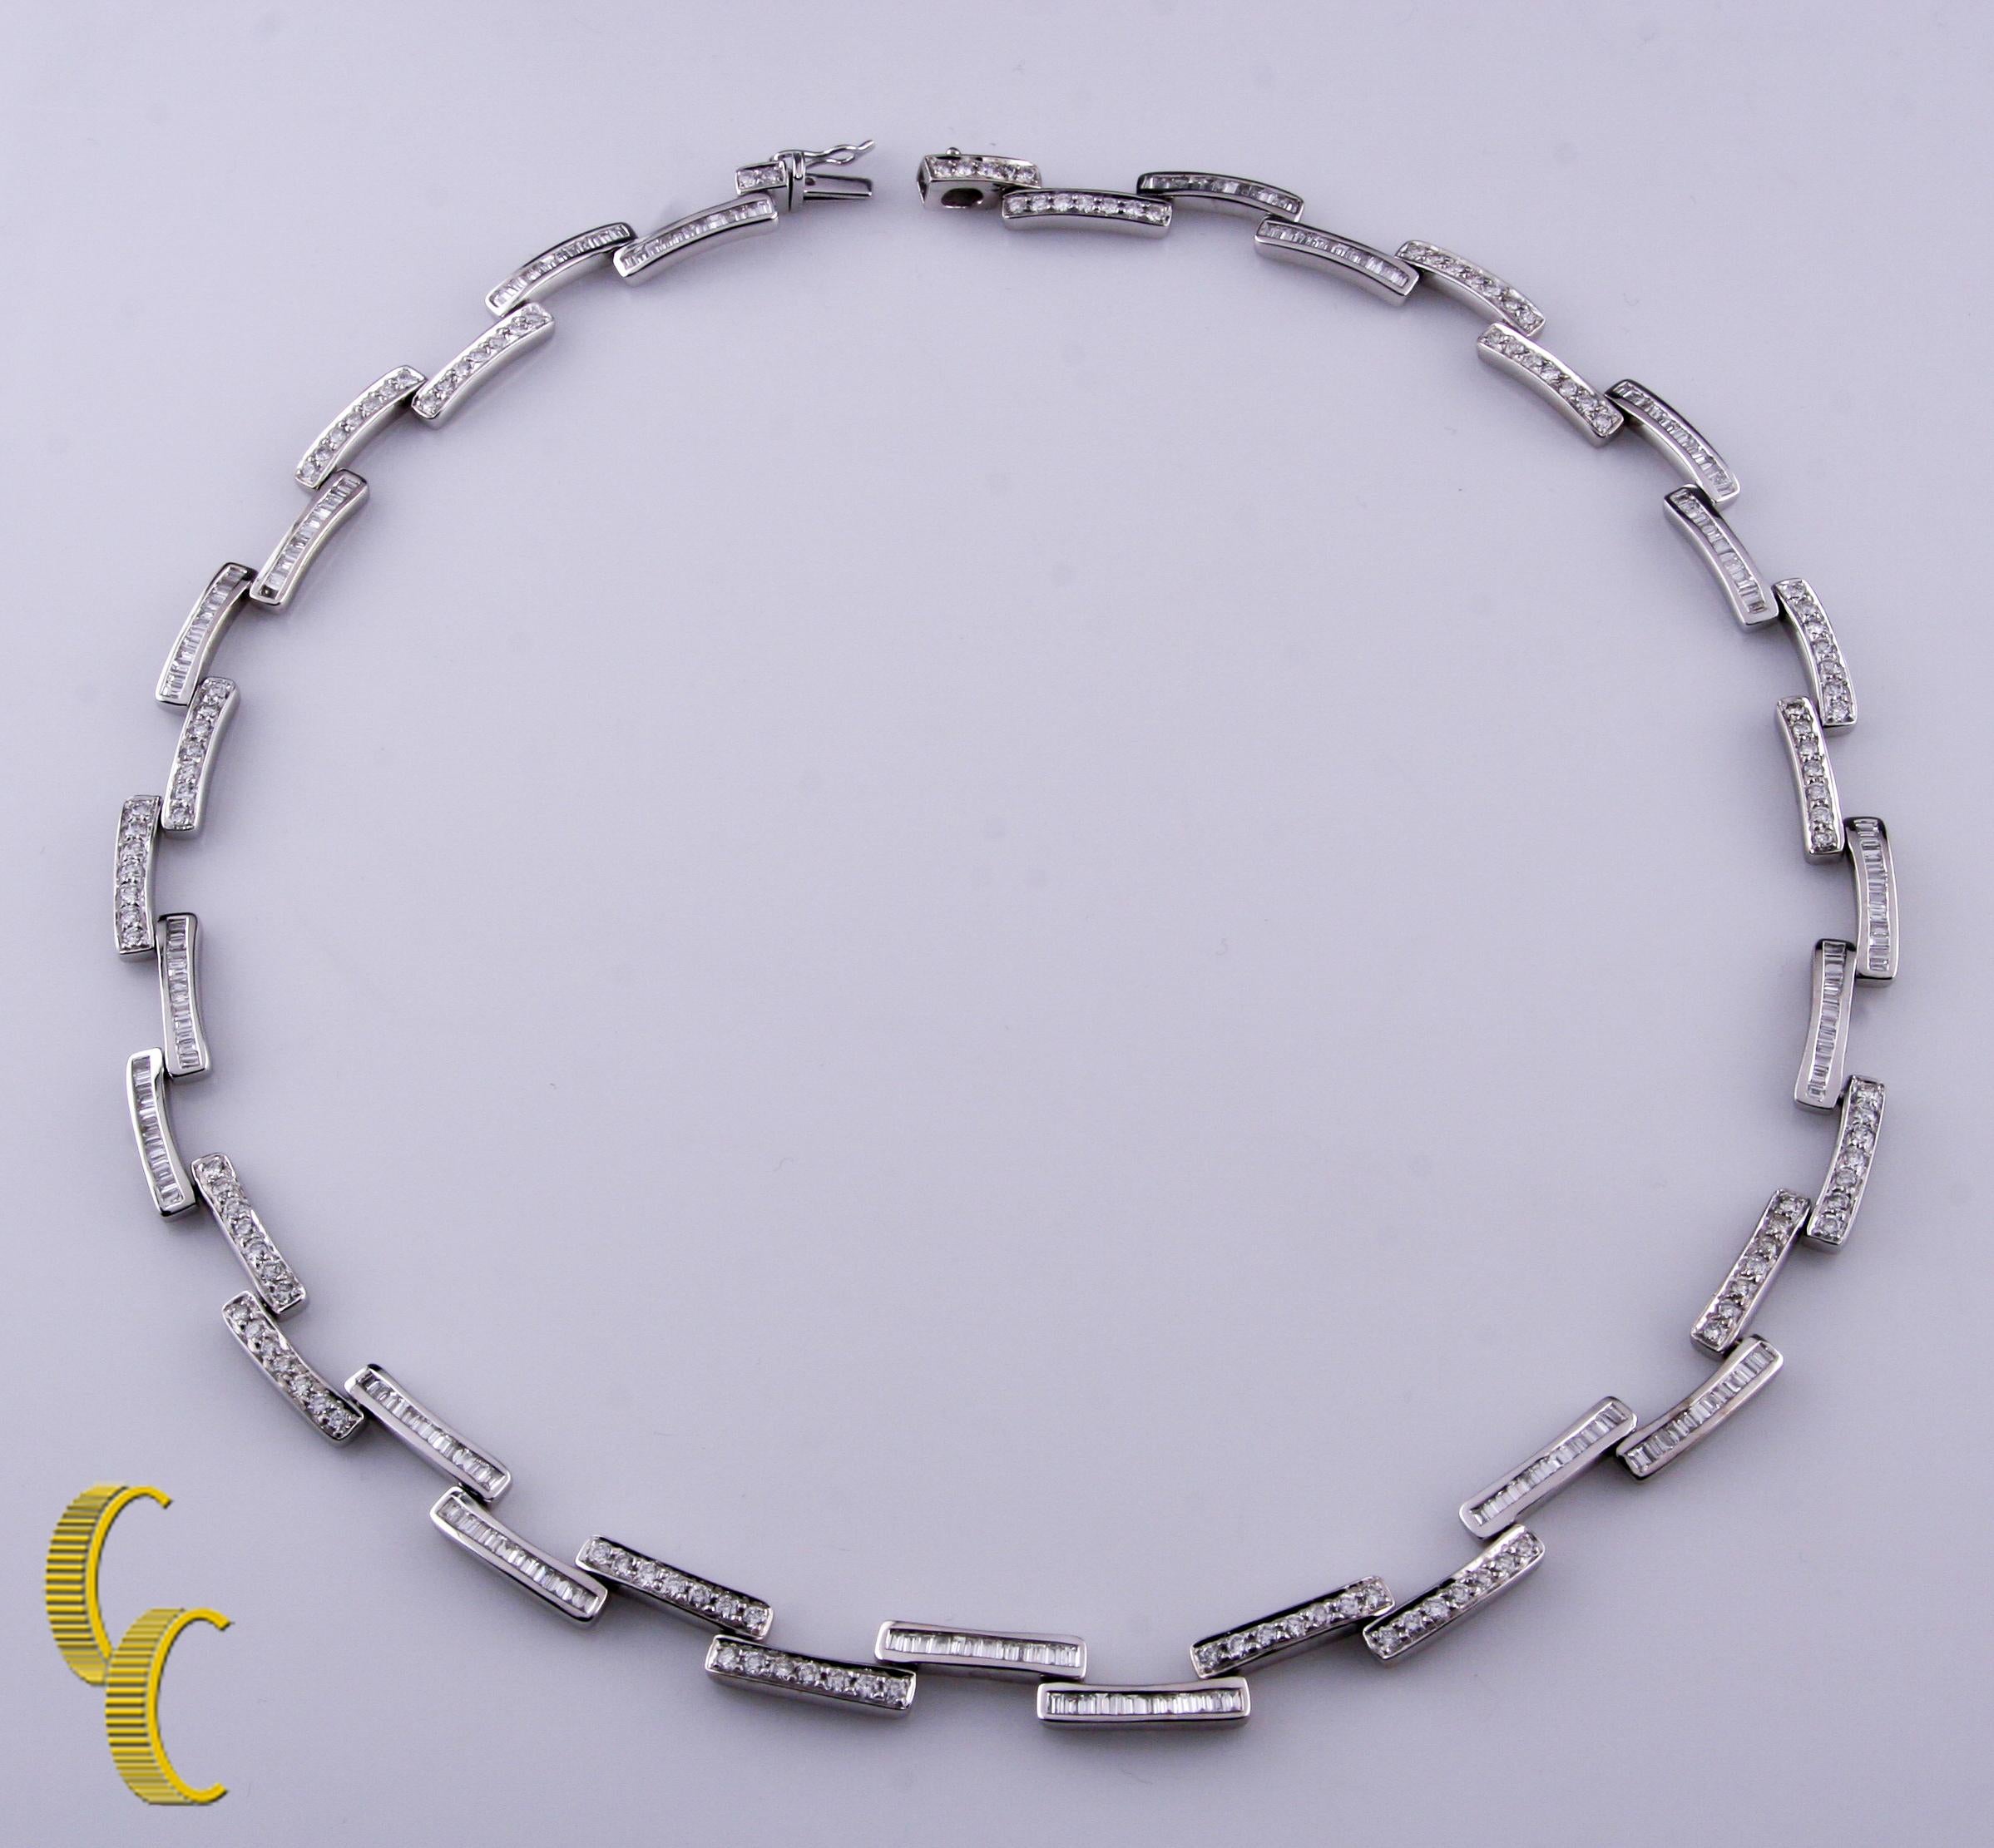 Gorgeous 18k White Gold Diamond Necklace
Features Alternating Bars of Gold with Pave-Set Round Diamonds and Channel-Set Baguette Diamonds
Pattern Alternates Two Bars of Each
Total Diamond Weight = 7.50 ct
Total Length = 16.5